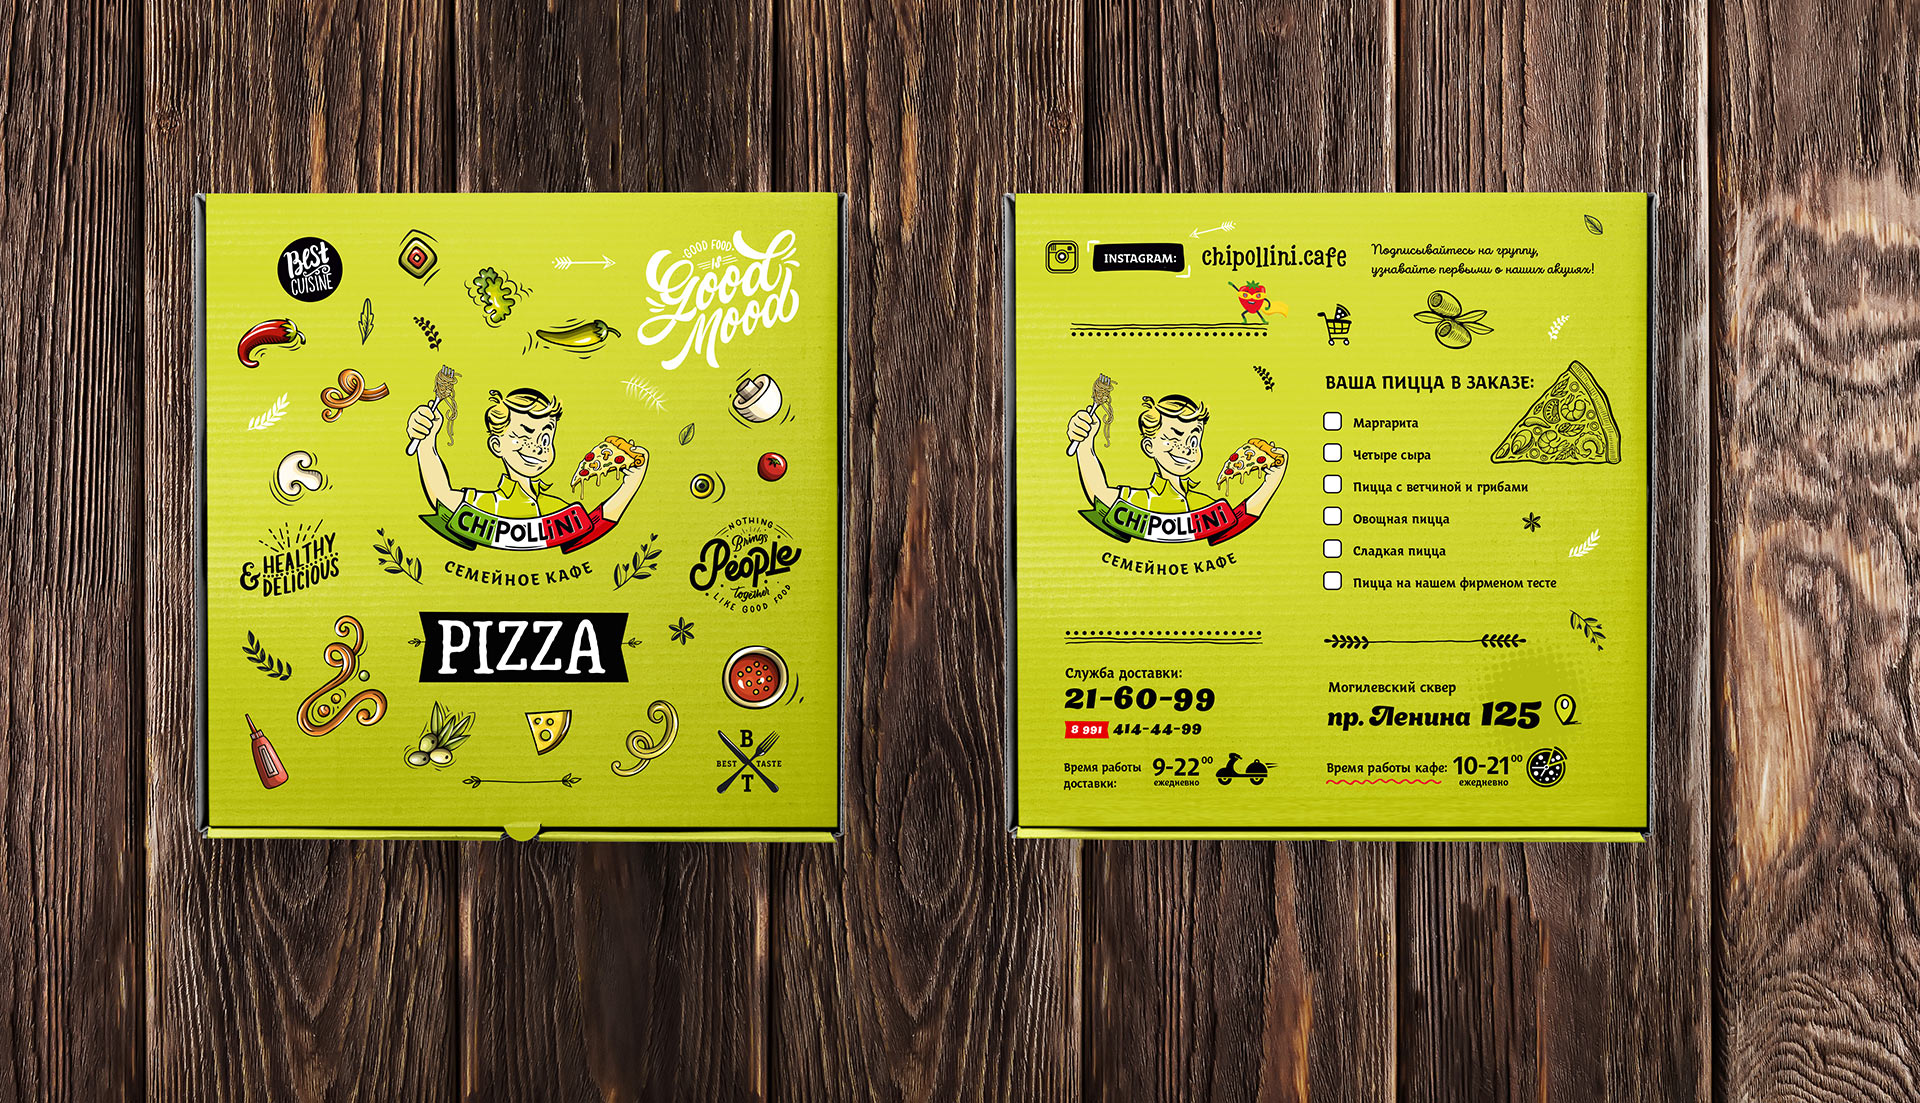 Pizza packaging design